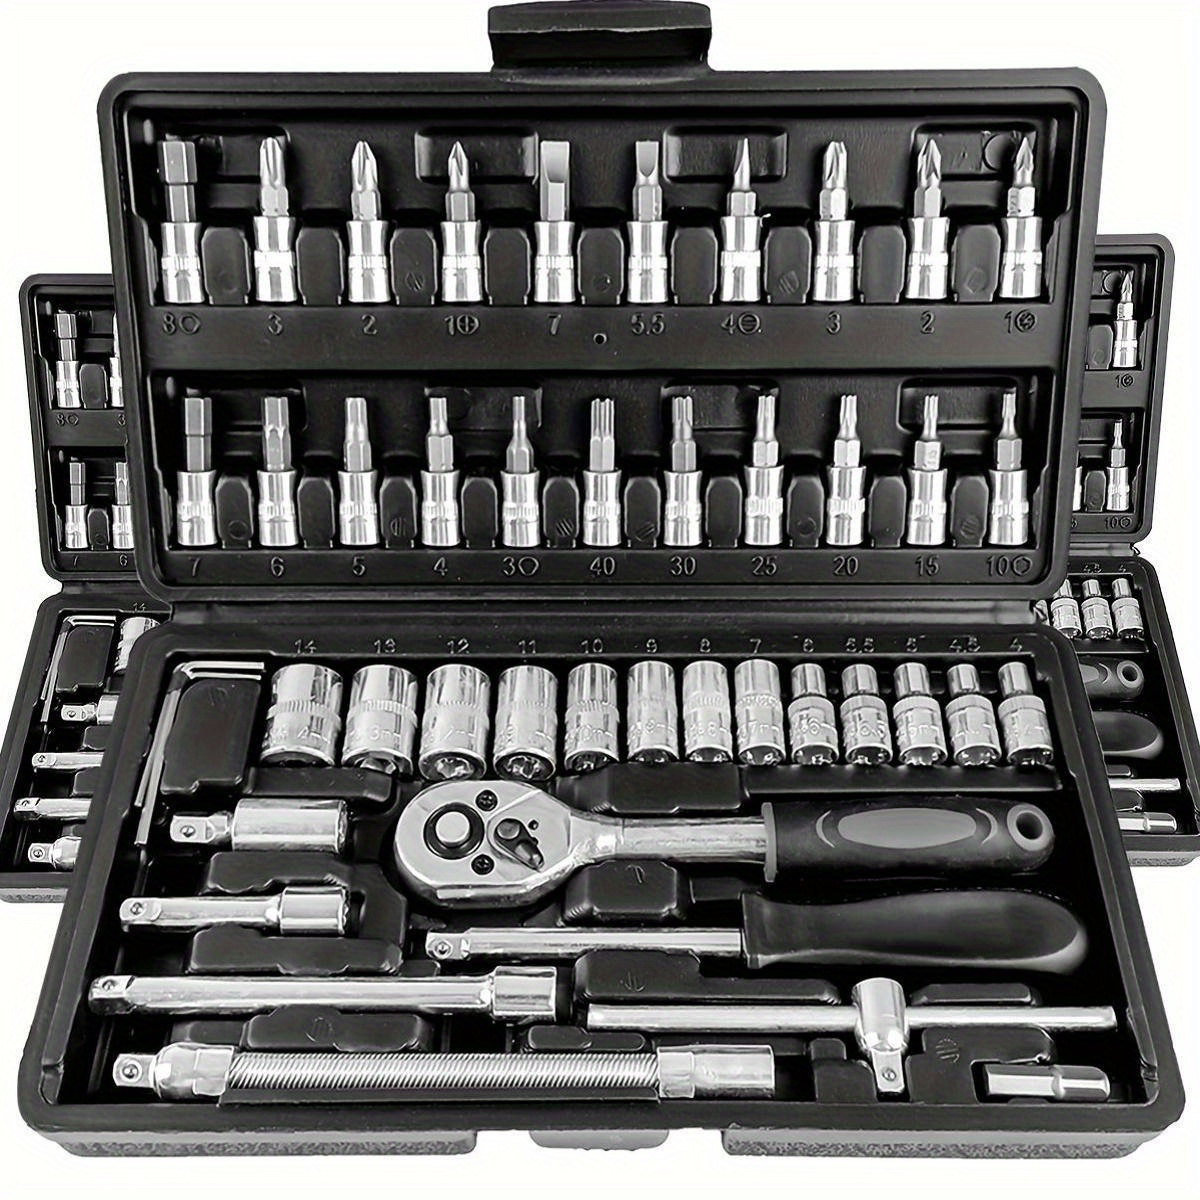 

Ultimate Automotive Mechanical Tool Kit - High-quality Ratchet Wrench And Assorted Screwdriver Set - Super Portable, All-in-one Solution For Car, Bike, And Motorcycle Maintenance